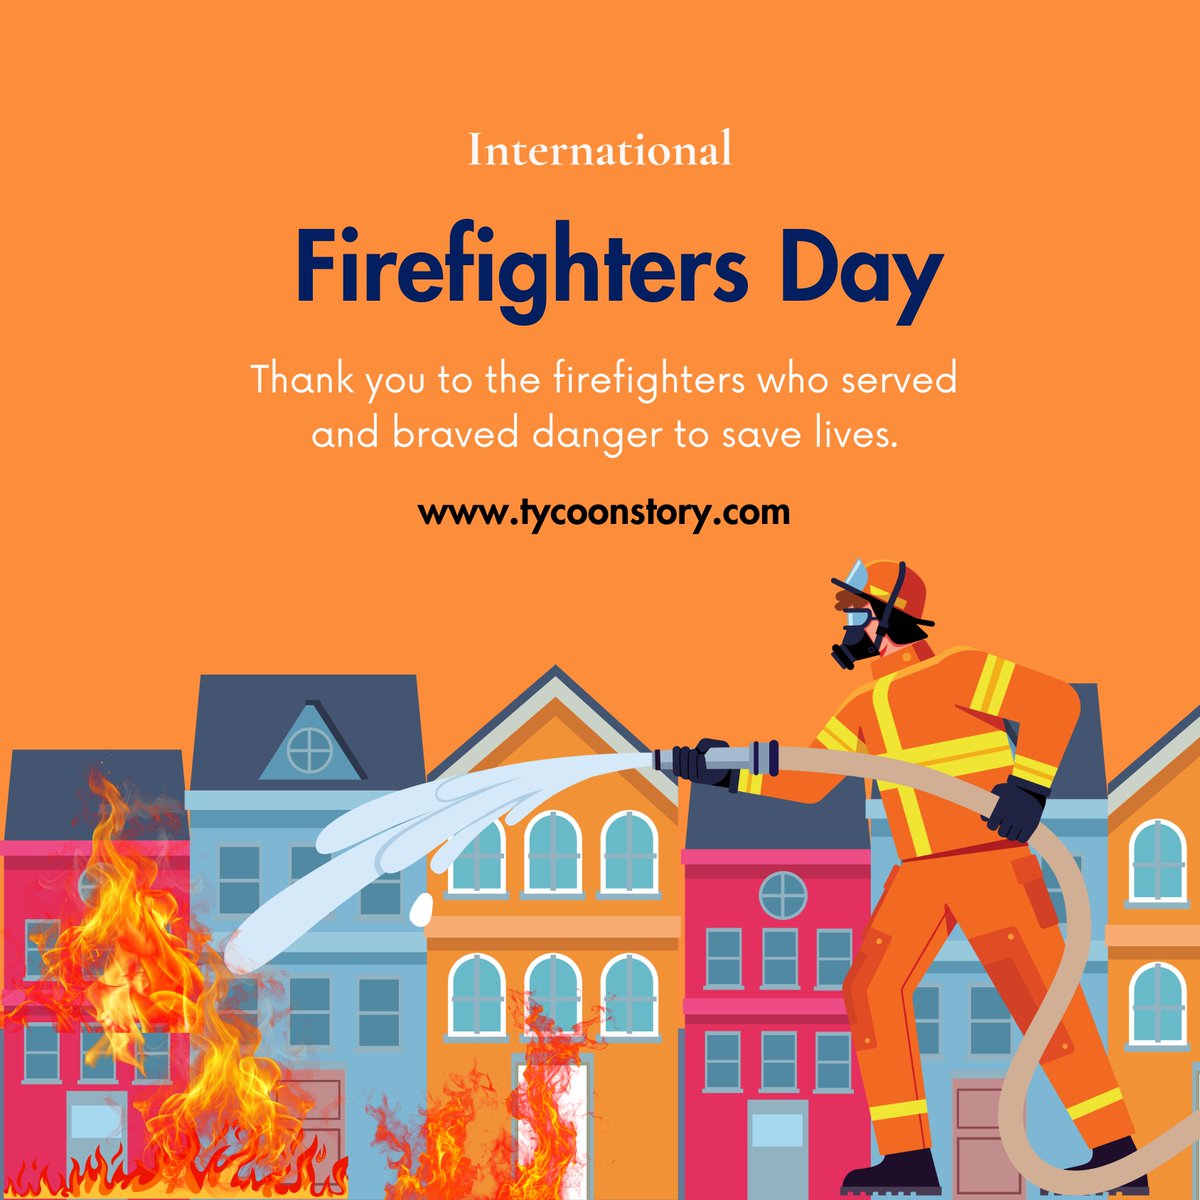 More than heroes. They're our firefighters.
#firefighters #firefighterlife #firedepartment #firefighterstrong #thankyoufirefighters #heroesinred #alwaysoncall #firerescue #fireprevention #internationalfirefightersday #volunteerfirefighter #womenfirefighters @IAFFofficial